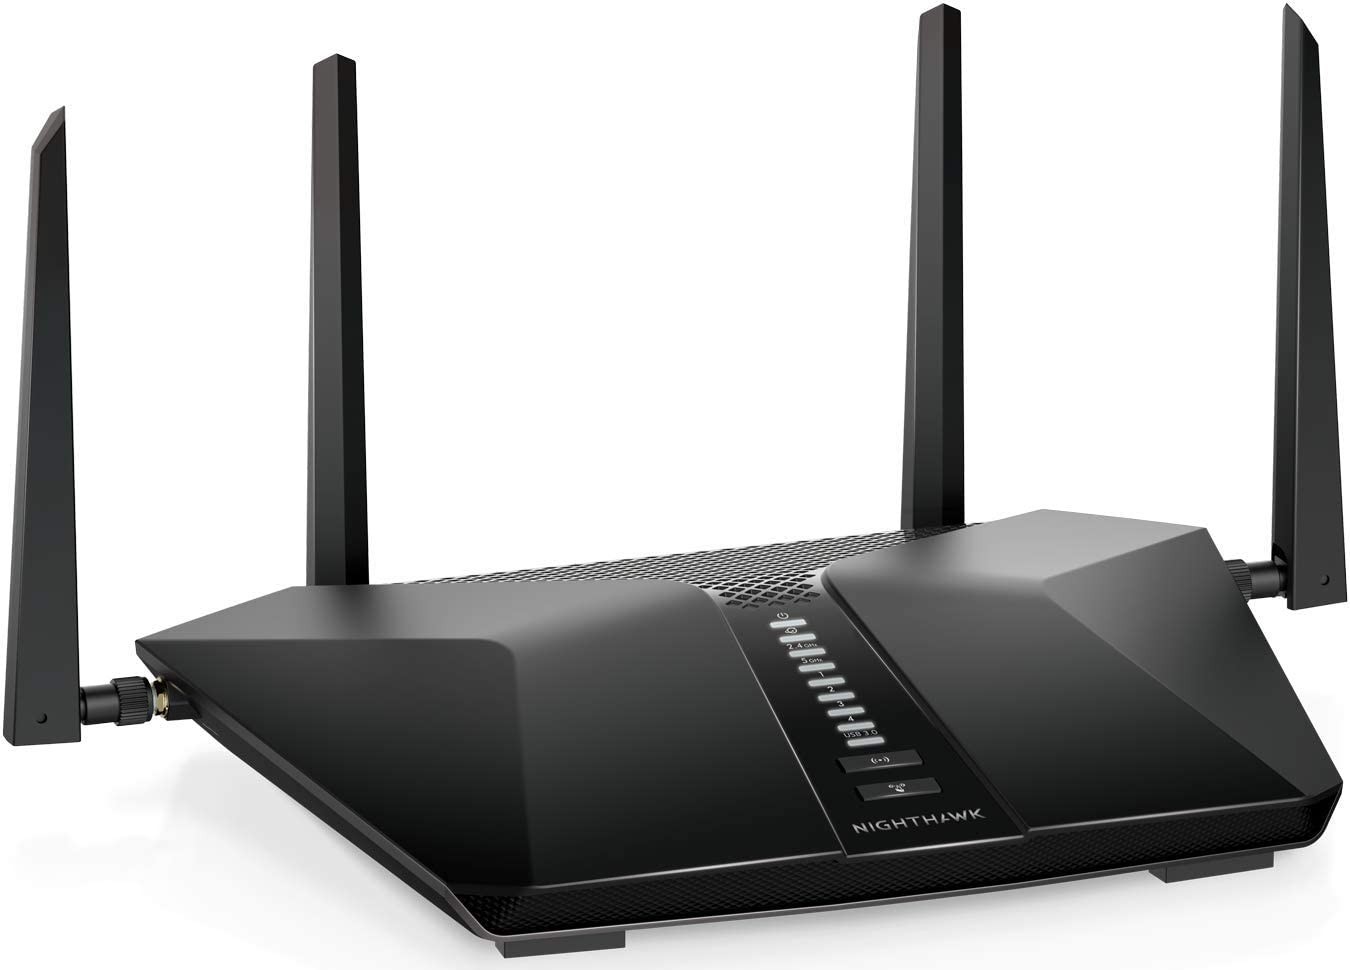 An important guide about selecting wireless routers